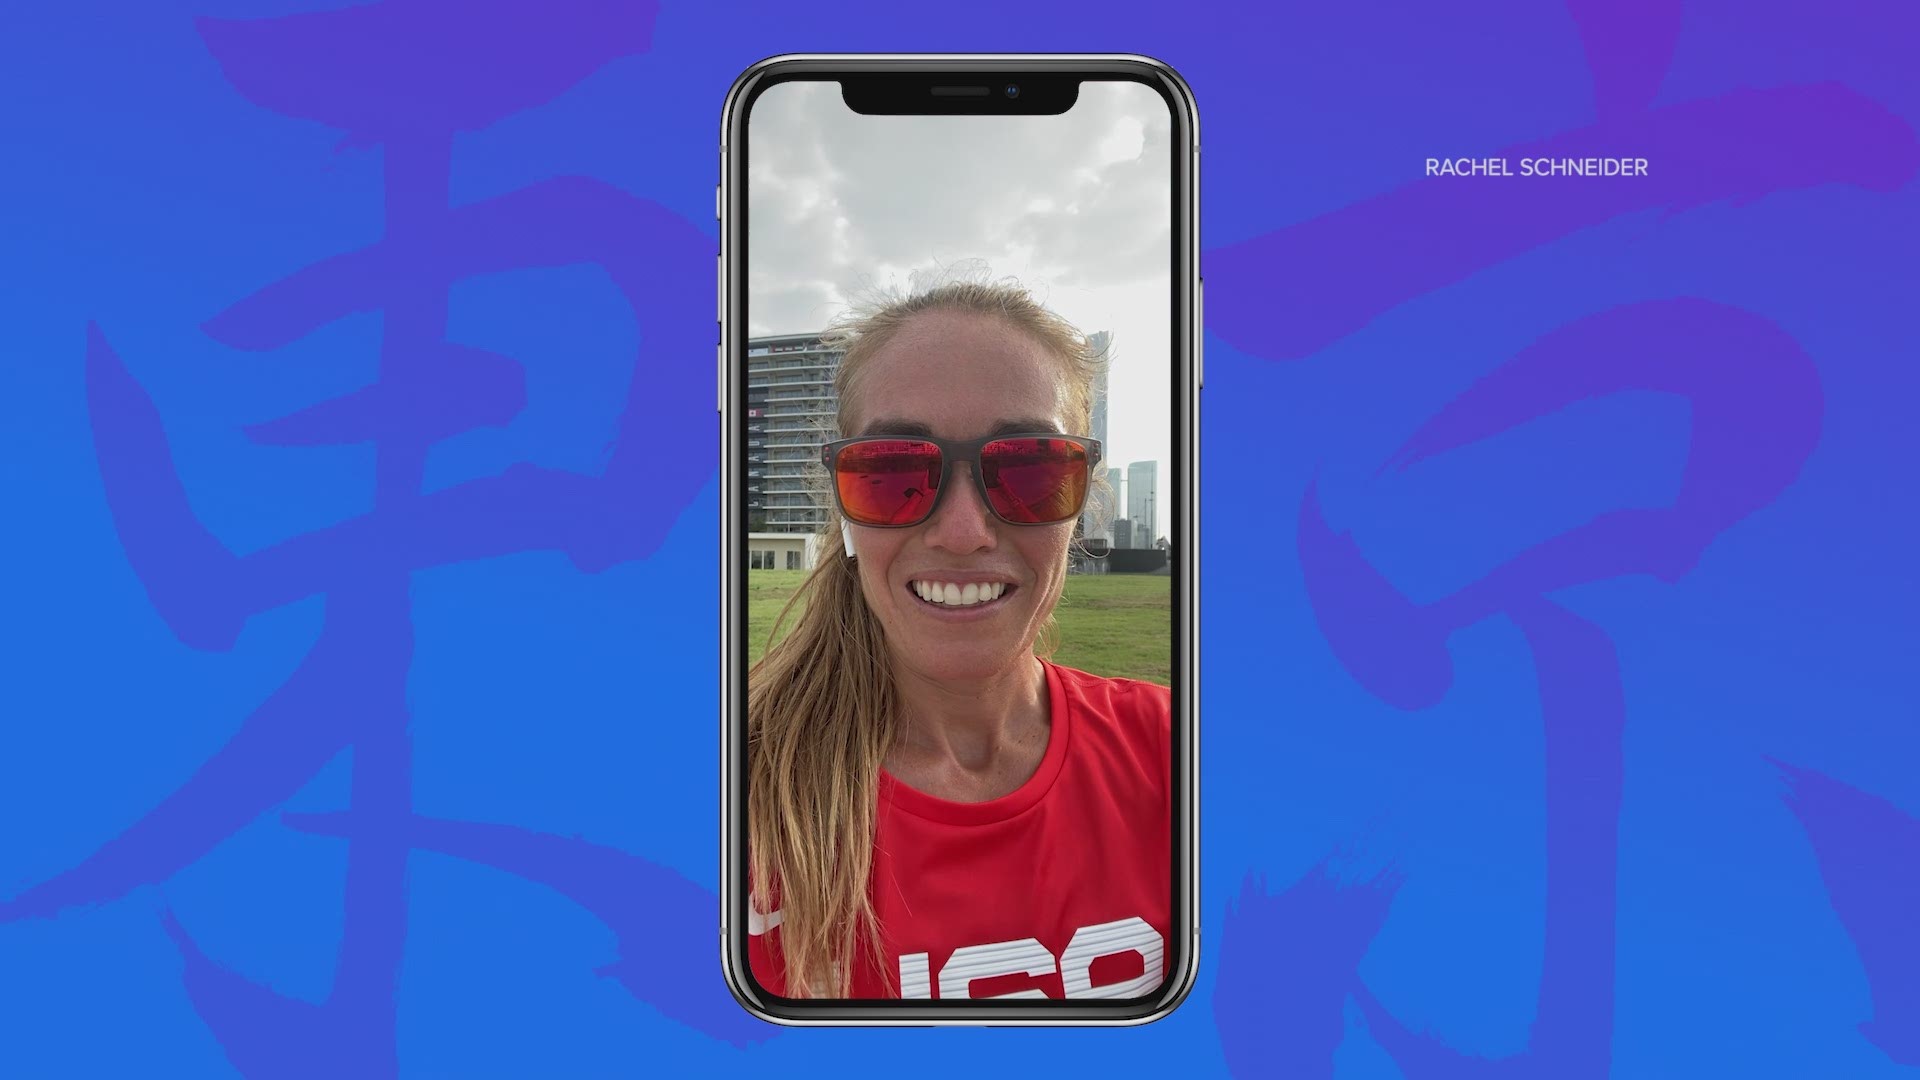 Rachel Schneider, who is on Team USA's Track & Field team, arrived in Tokyo and shared videos and photos with NEWS CENTER Maine of the Olympic Village and stadium.